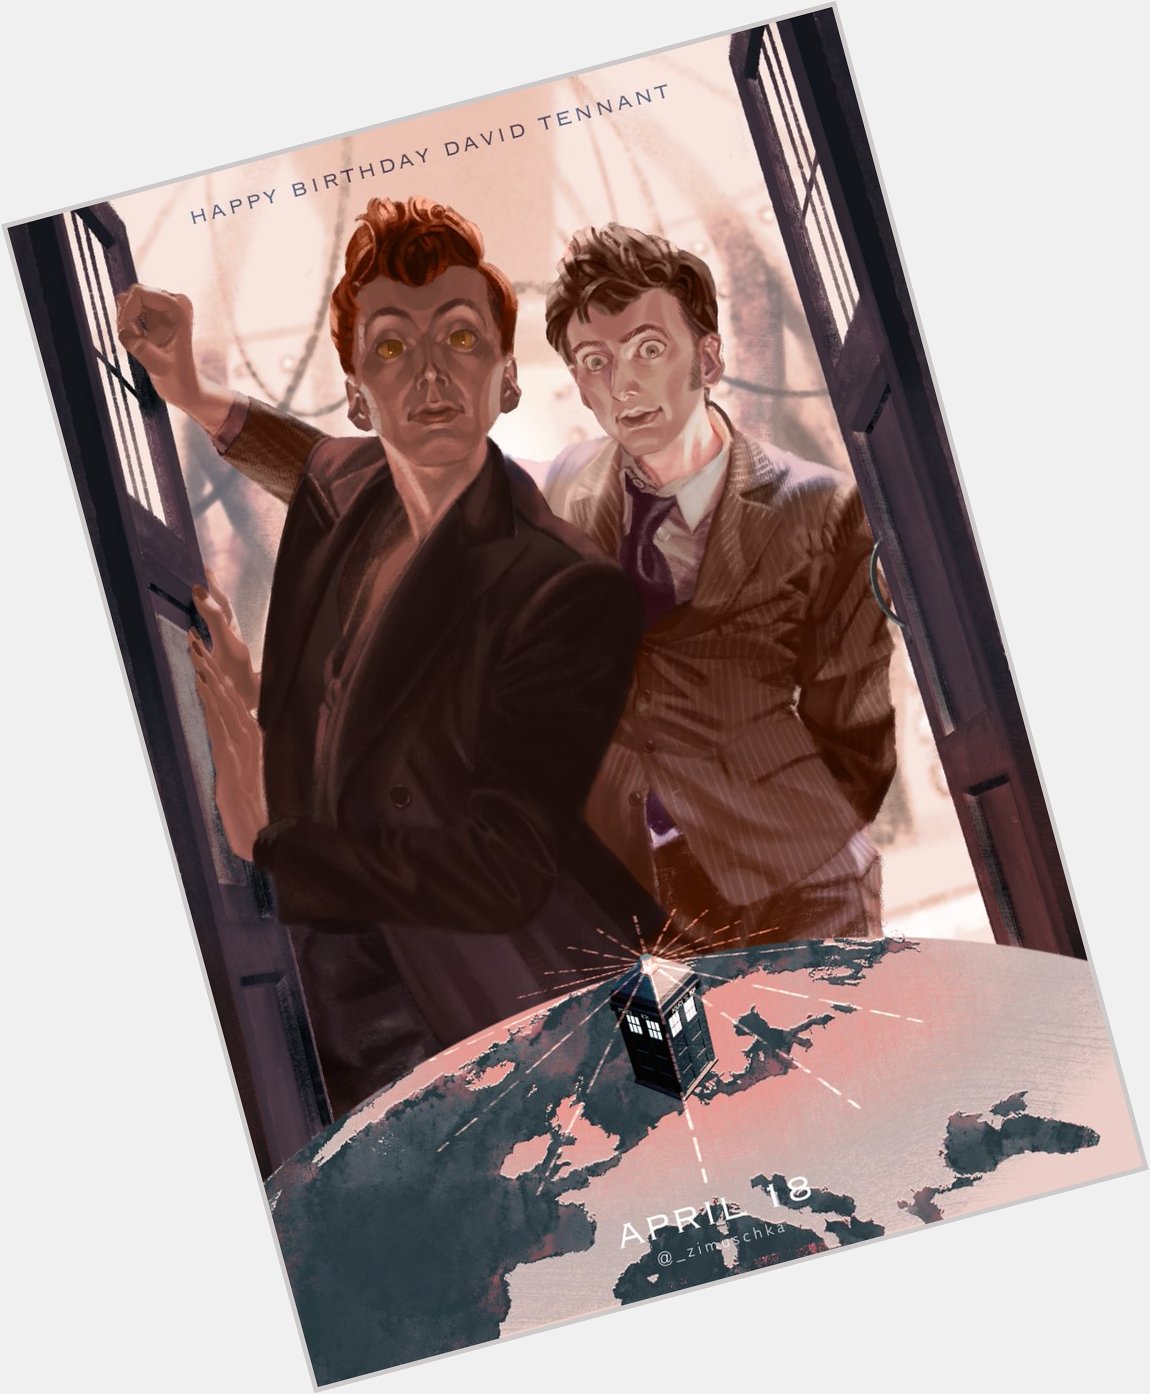 Happy Birthday David Tennant !
Crowley and Tenth Doctor     